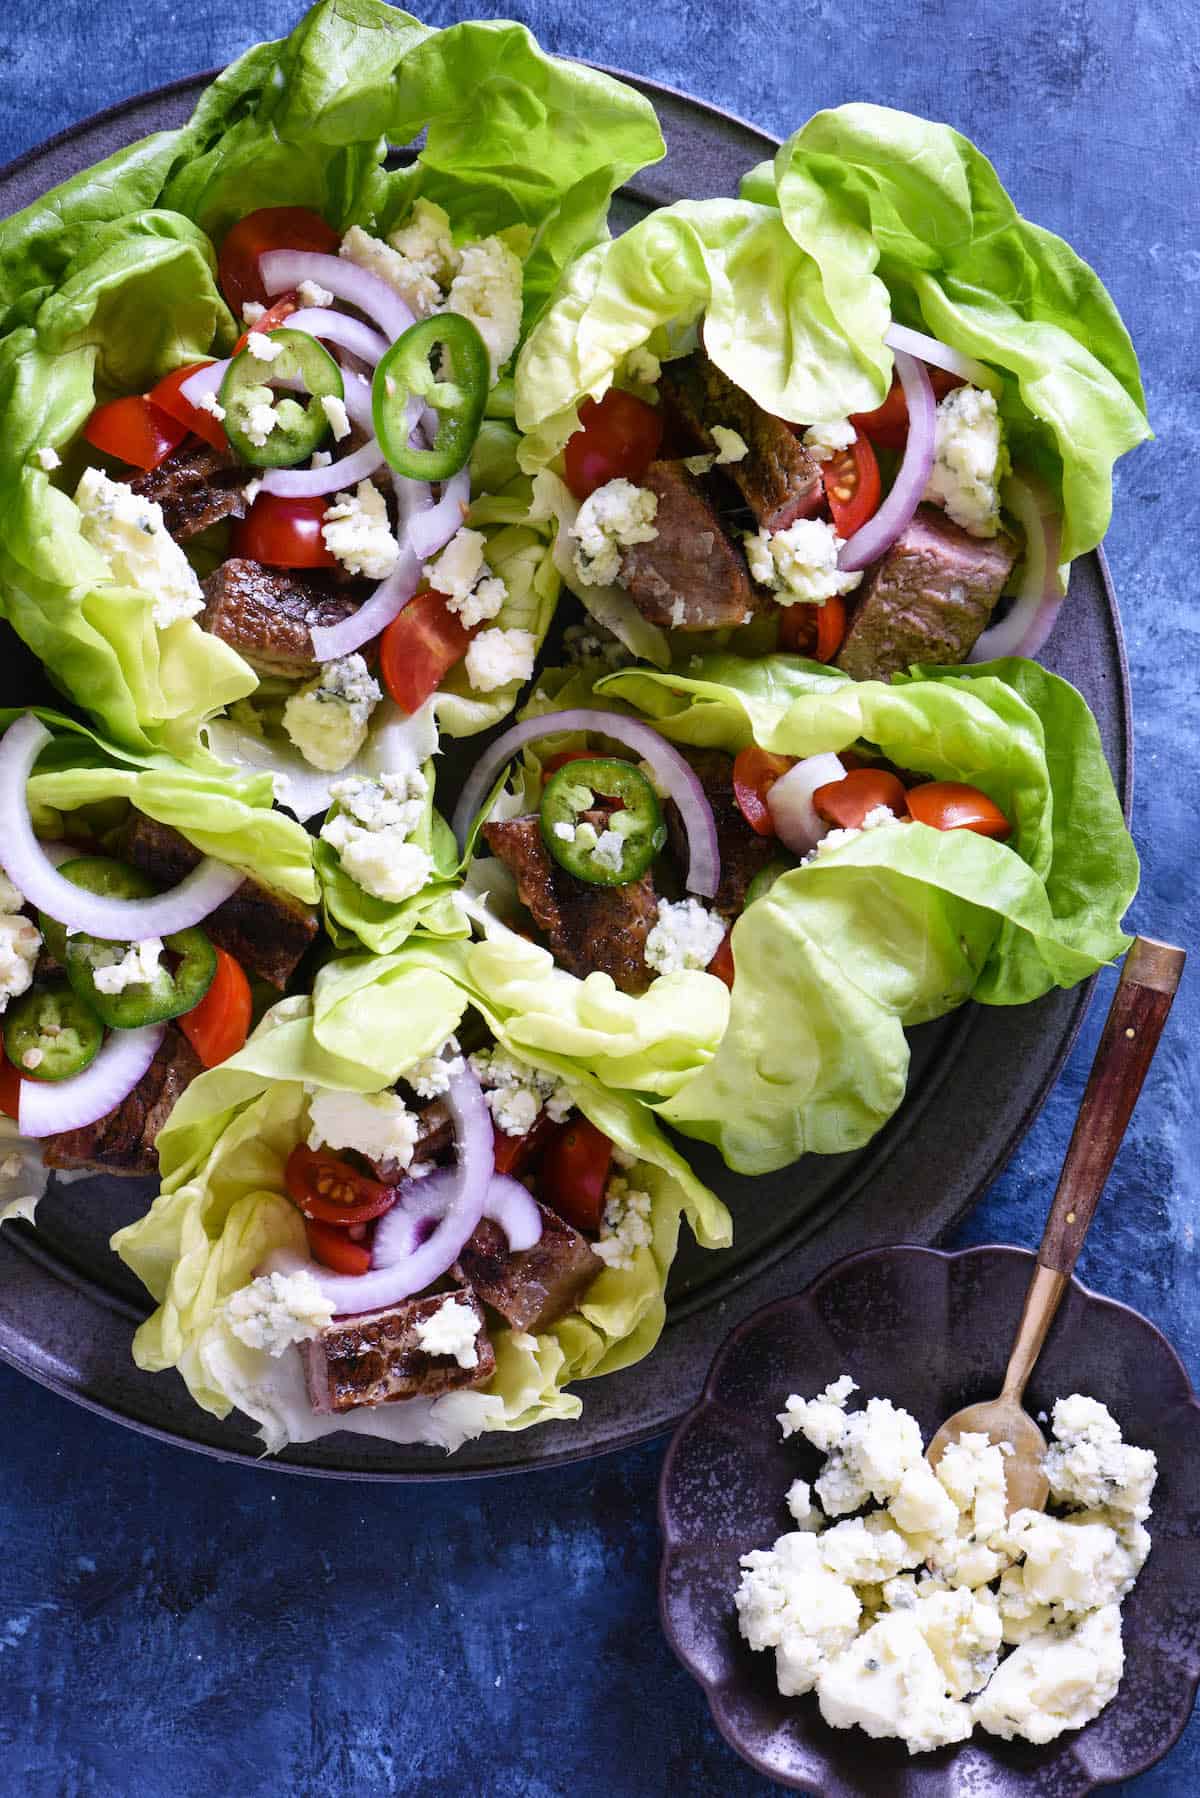 Beef wrapped in lettuce with blue cheese, tomatoes and onions on a gray plate on a blue background.